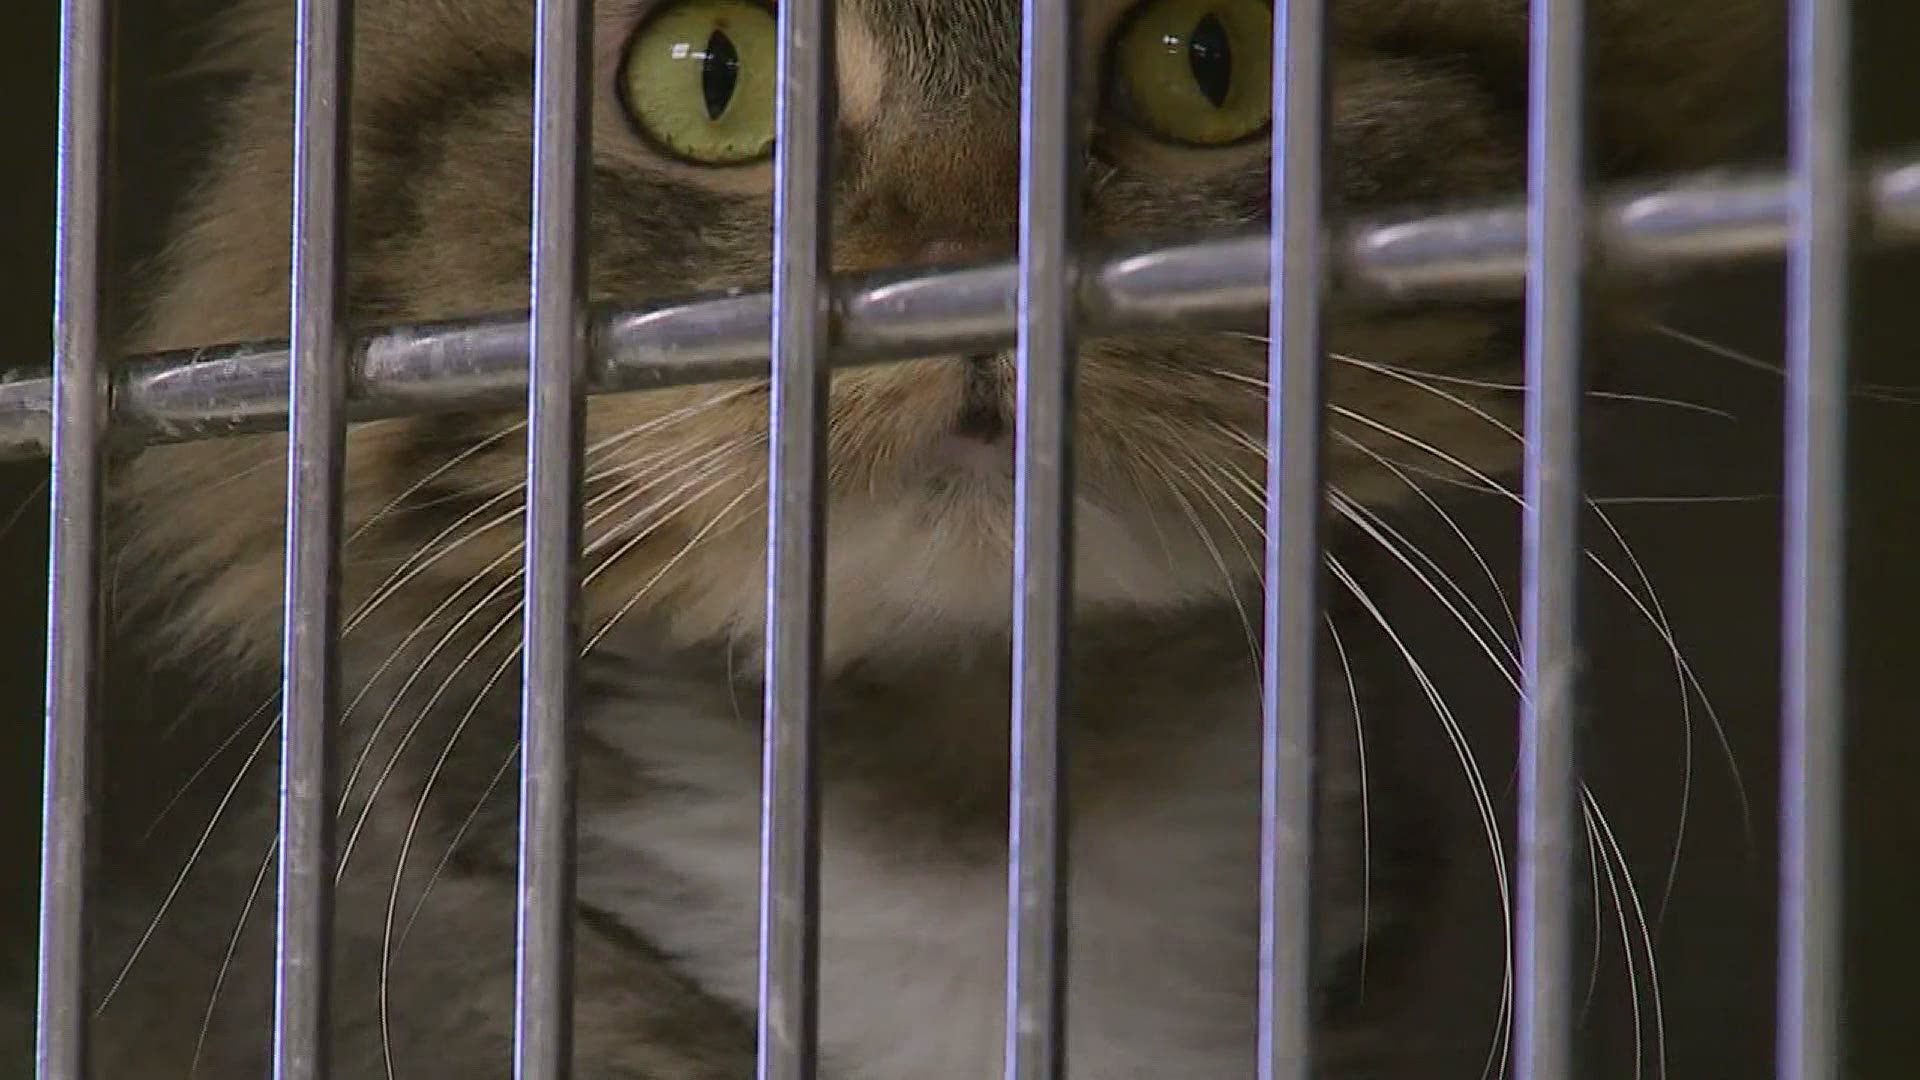 Right now, the adoption fee is $20 for a cat or kitten to help keep the animal shelter open.